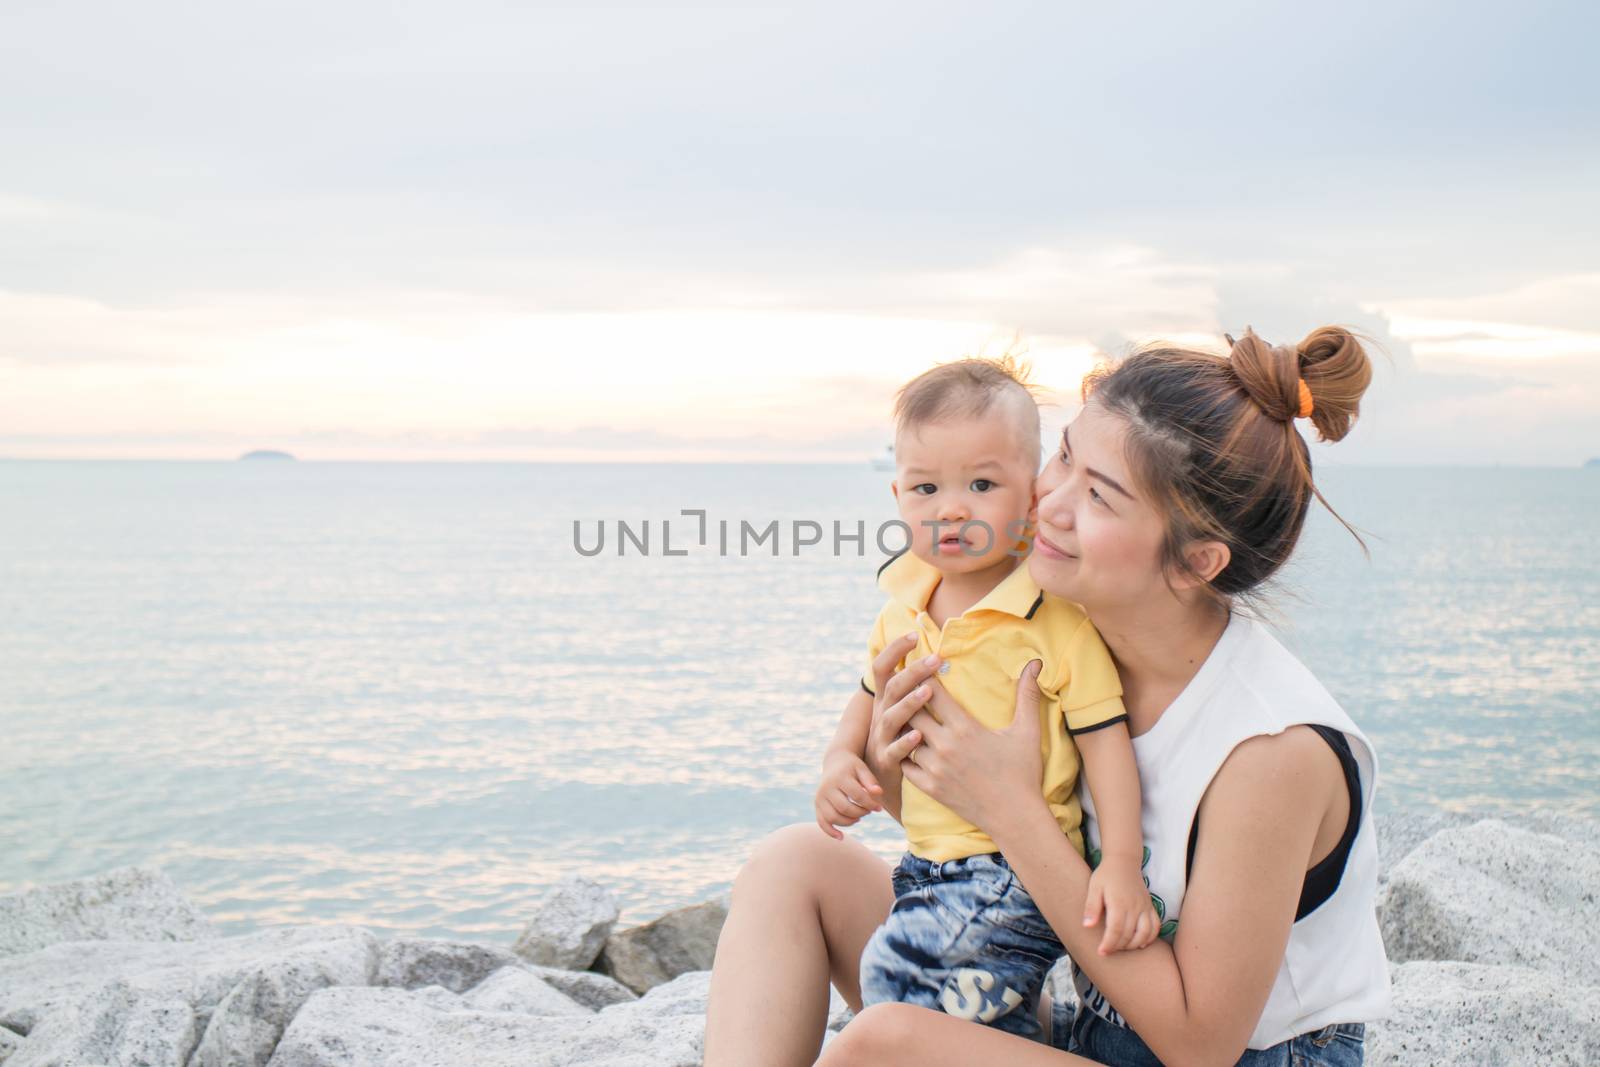 Cute boy pose on the beach with his mother, stock photo